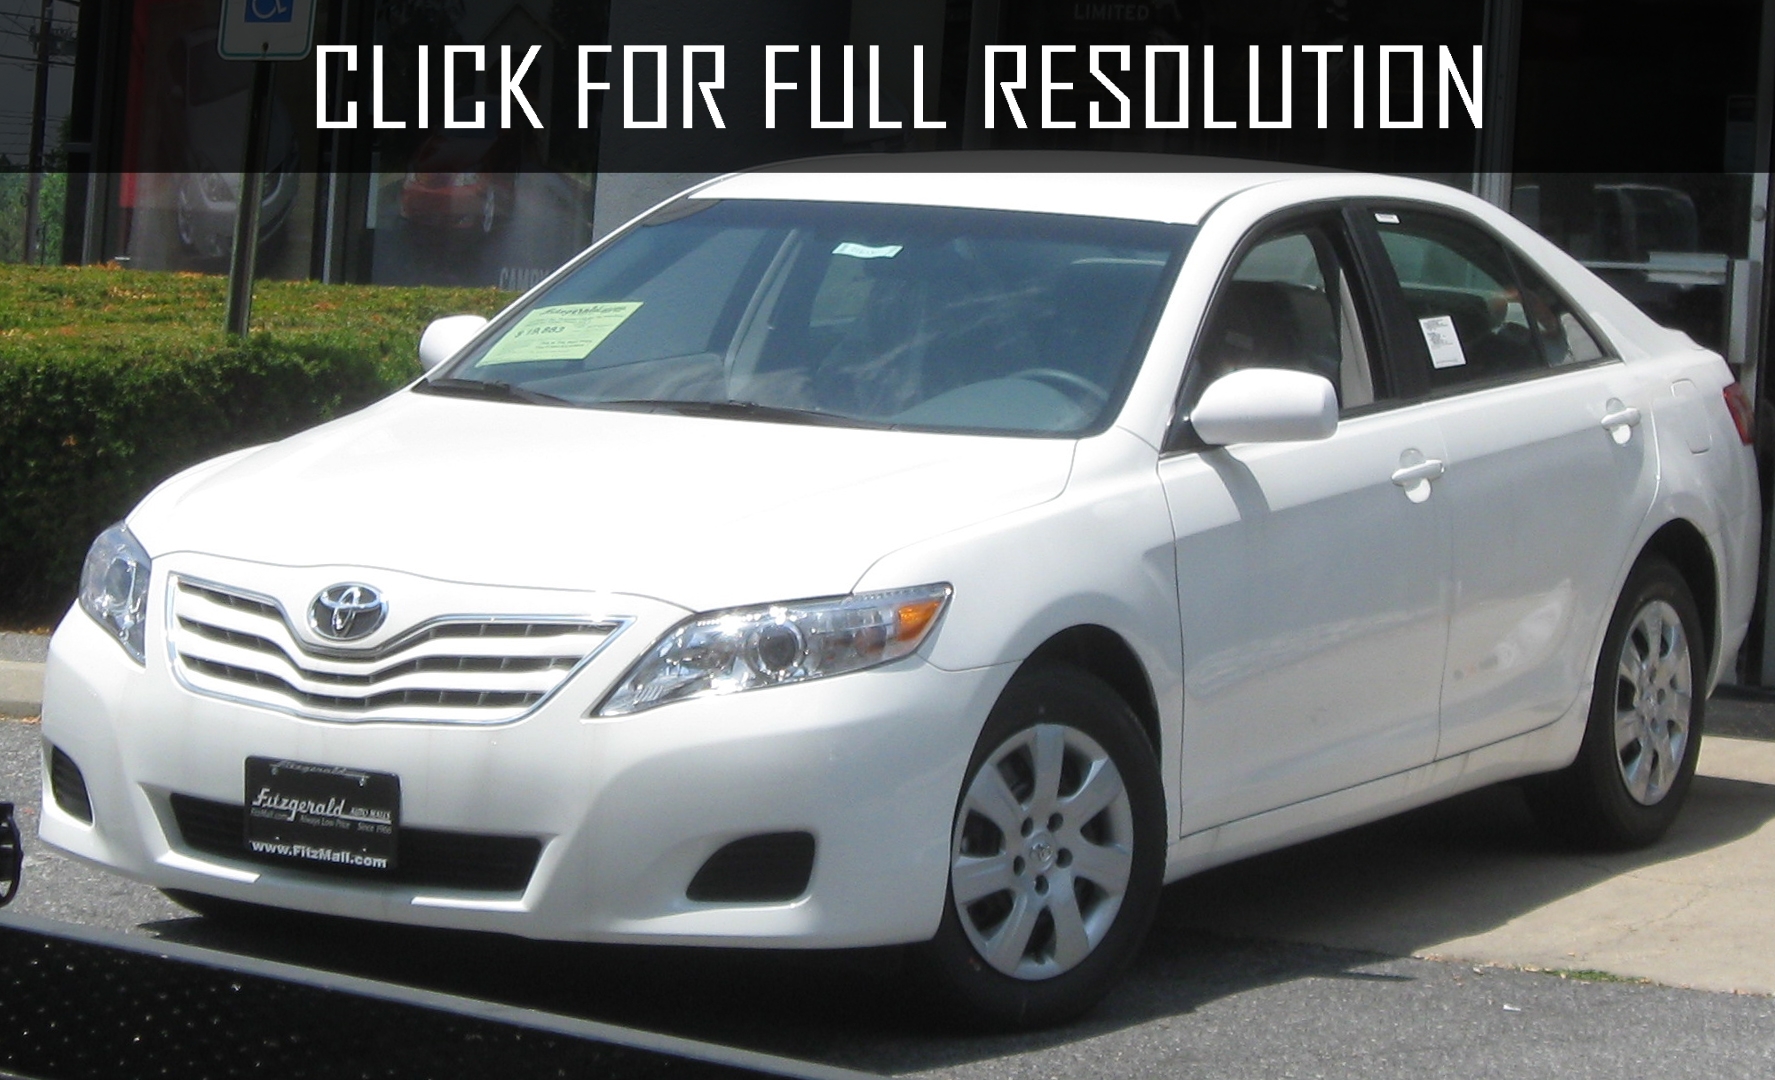 2010 Toyota Camry Le